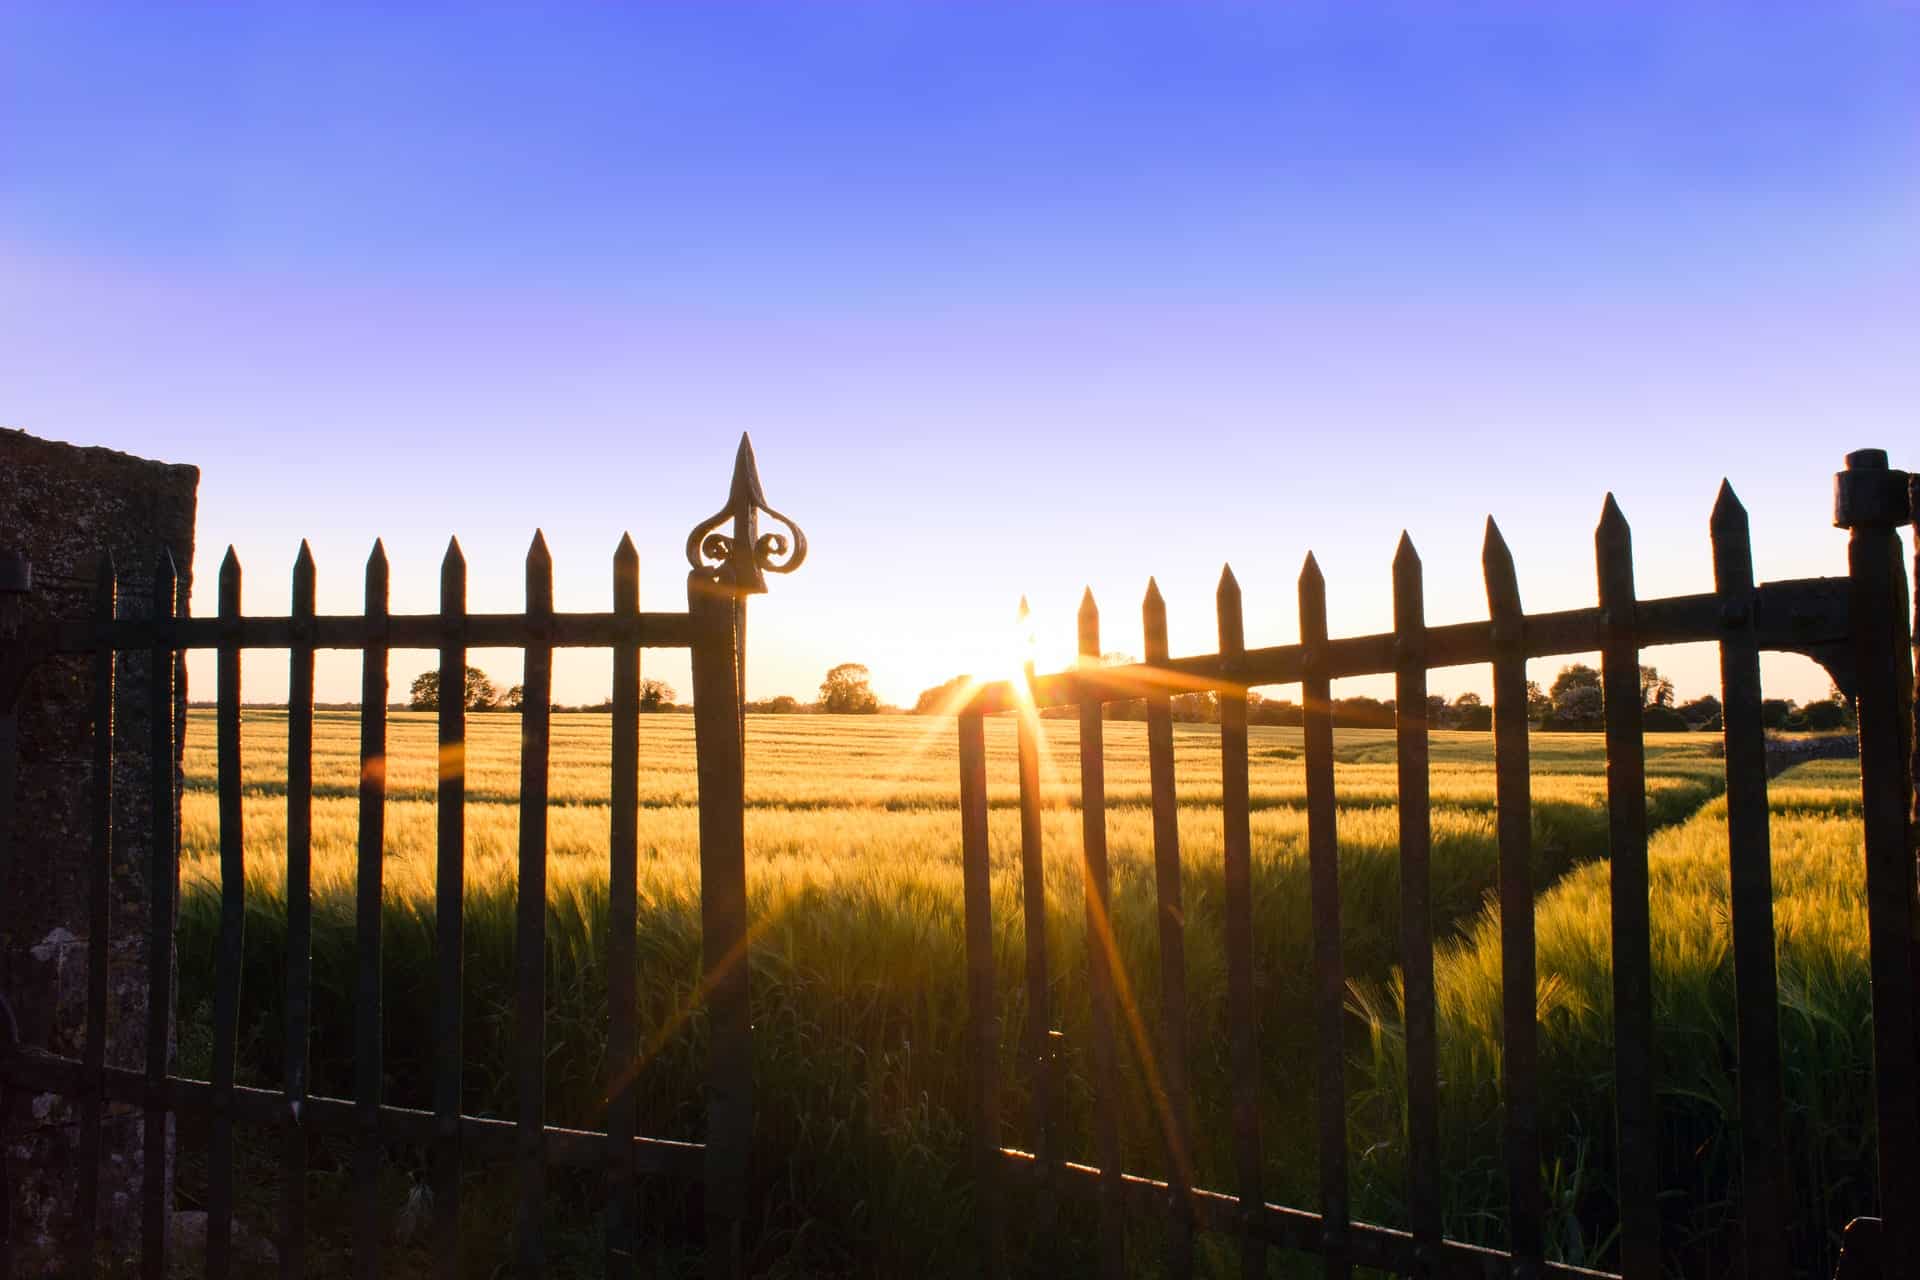 a gate partially opened facing a field at sundown